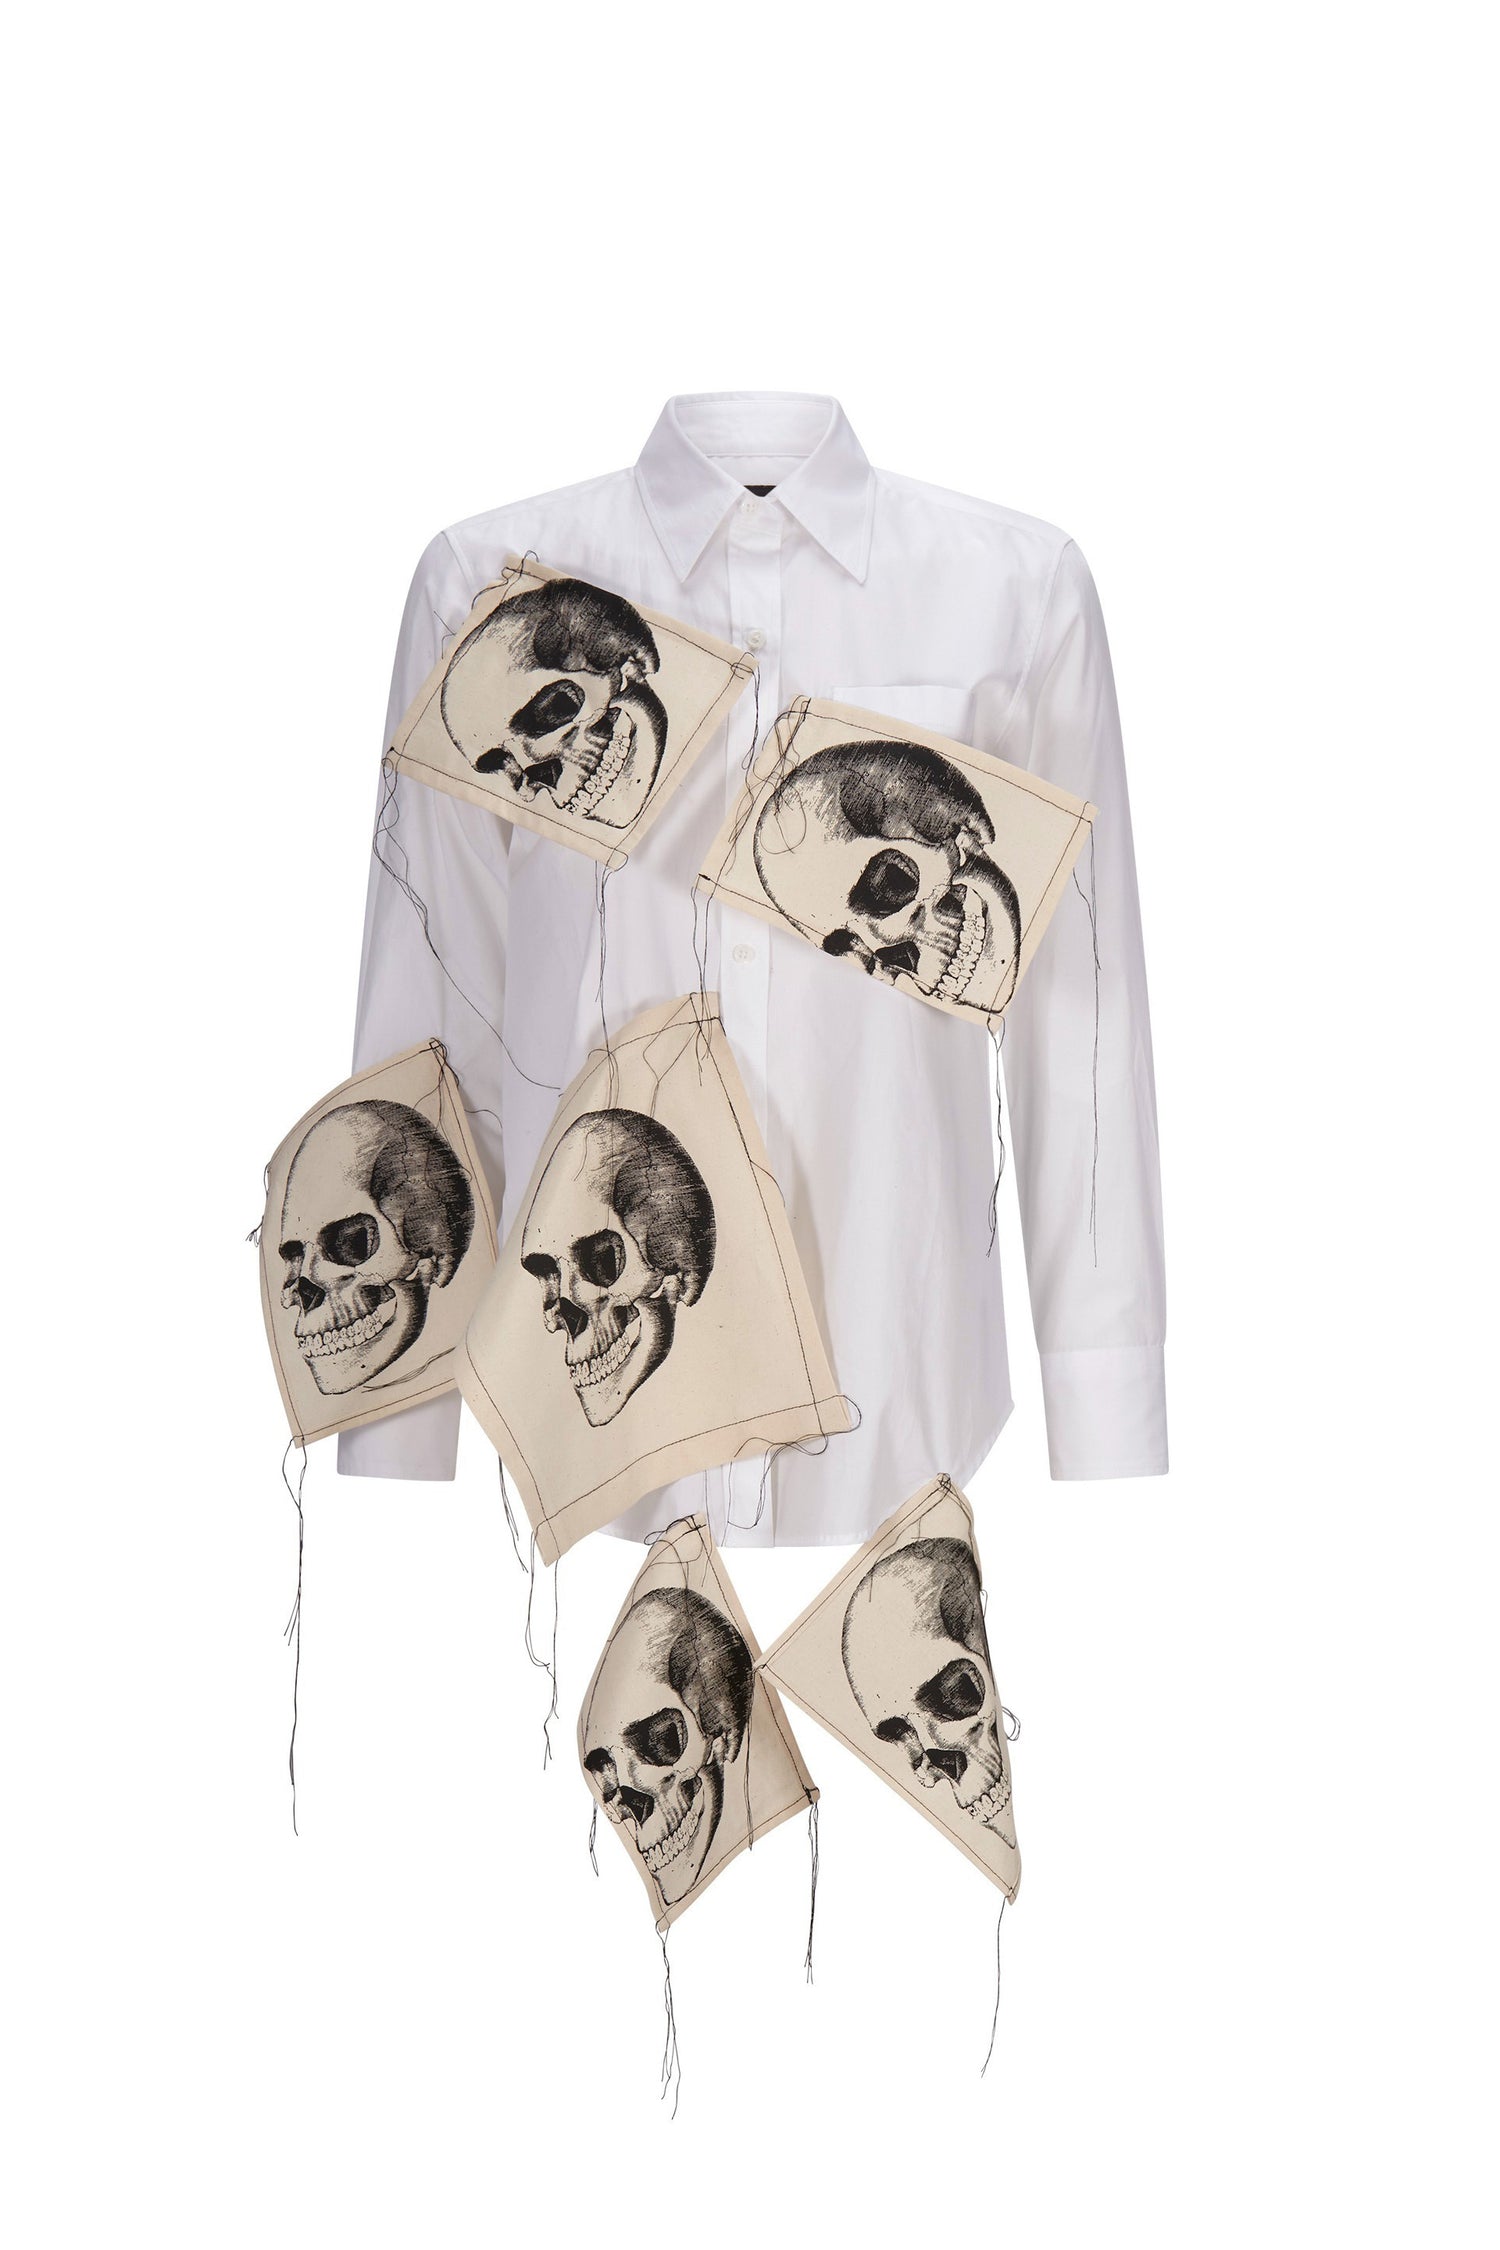 'TALES FROM THE CRYPT' NEW CLASSIC SHIRT -  - Libertine